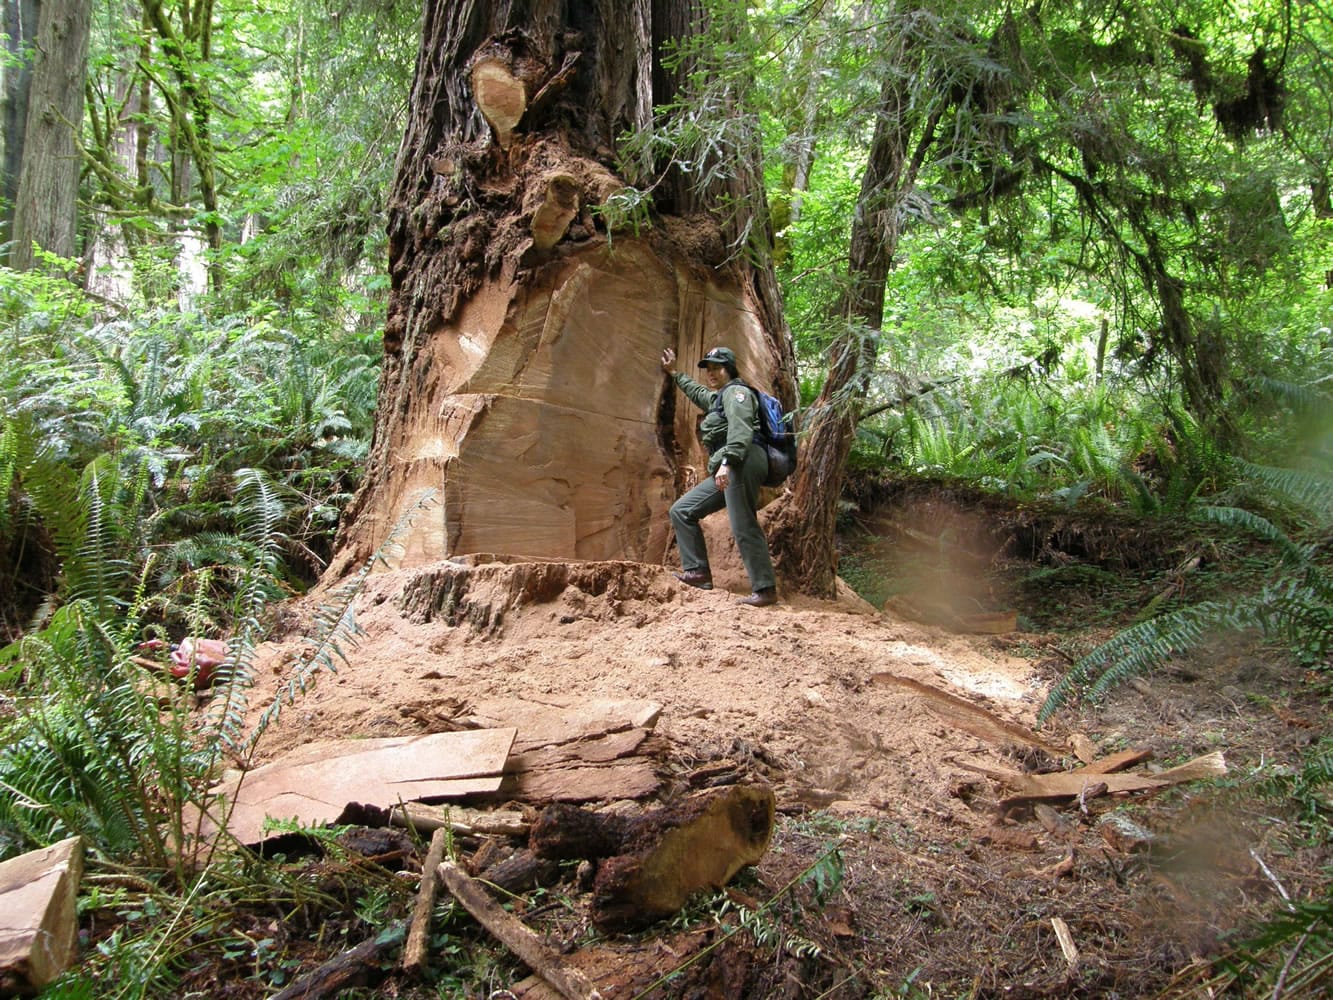 Wildlife biologist Terry Hines stands next to a massive scar on an old growth redwood tree in the Redwood National and State Parks near Klamath, Calif., where poachers have cut off a burl to sell for decorative wood.